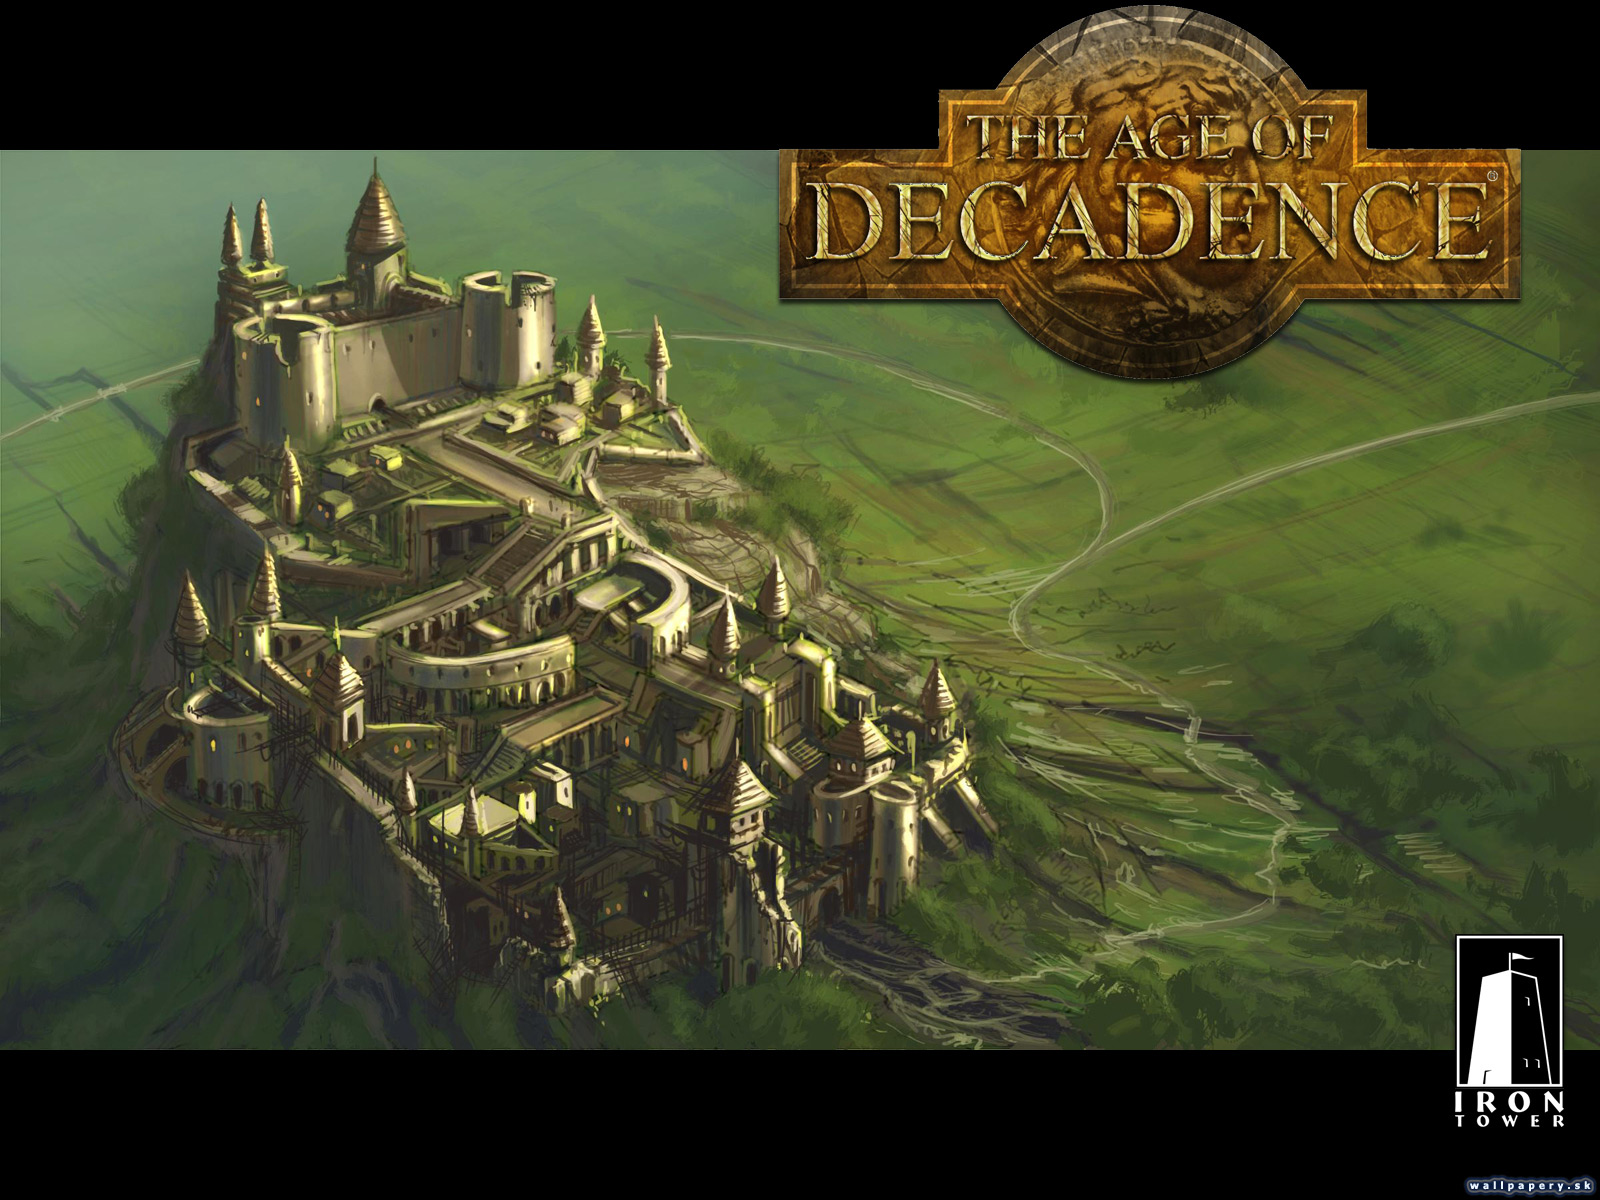 The Age of Decadence - wallpaper 2